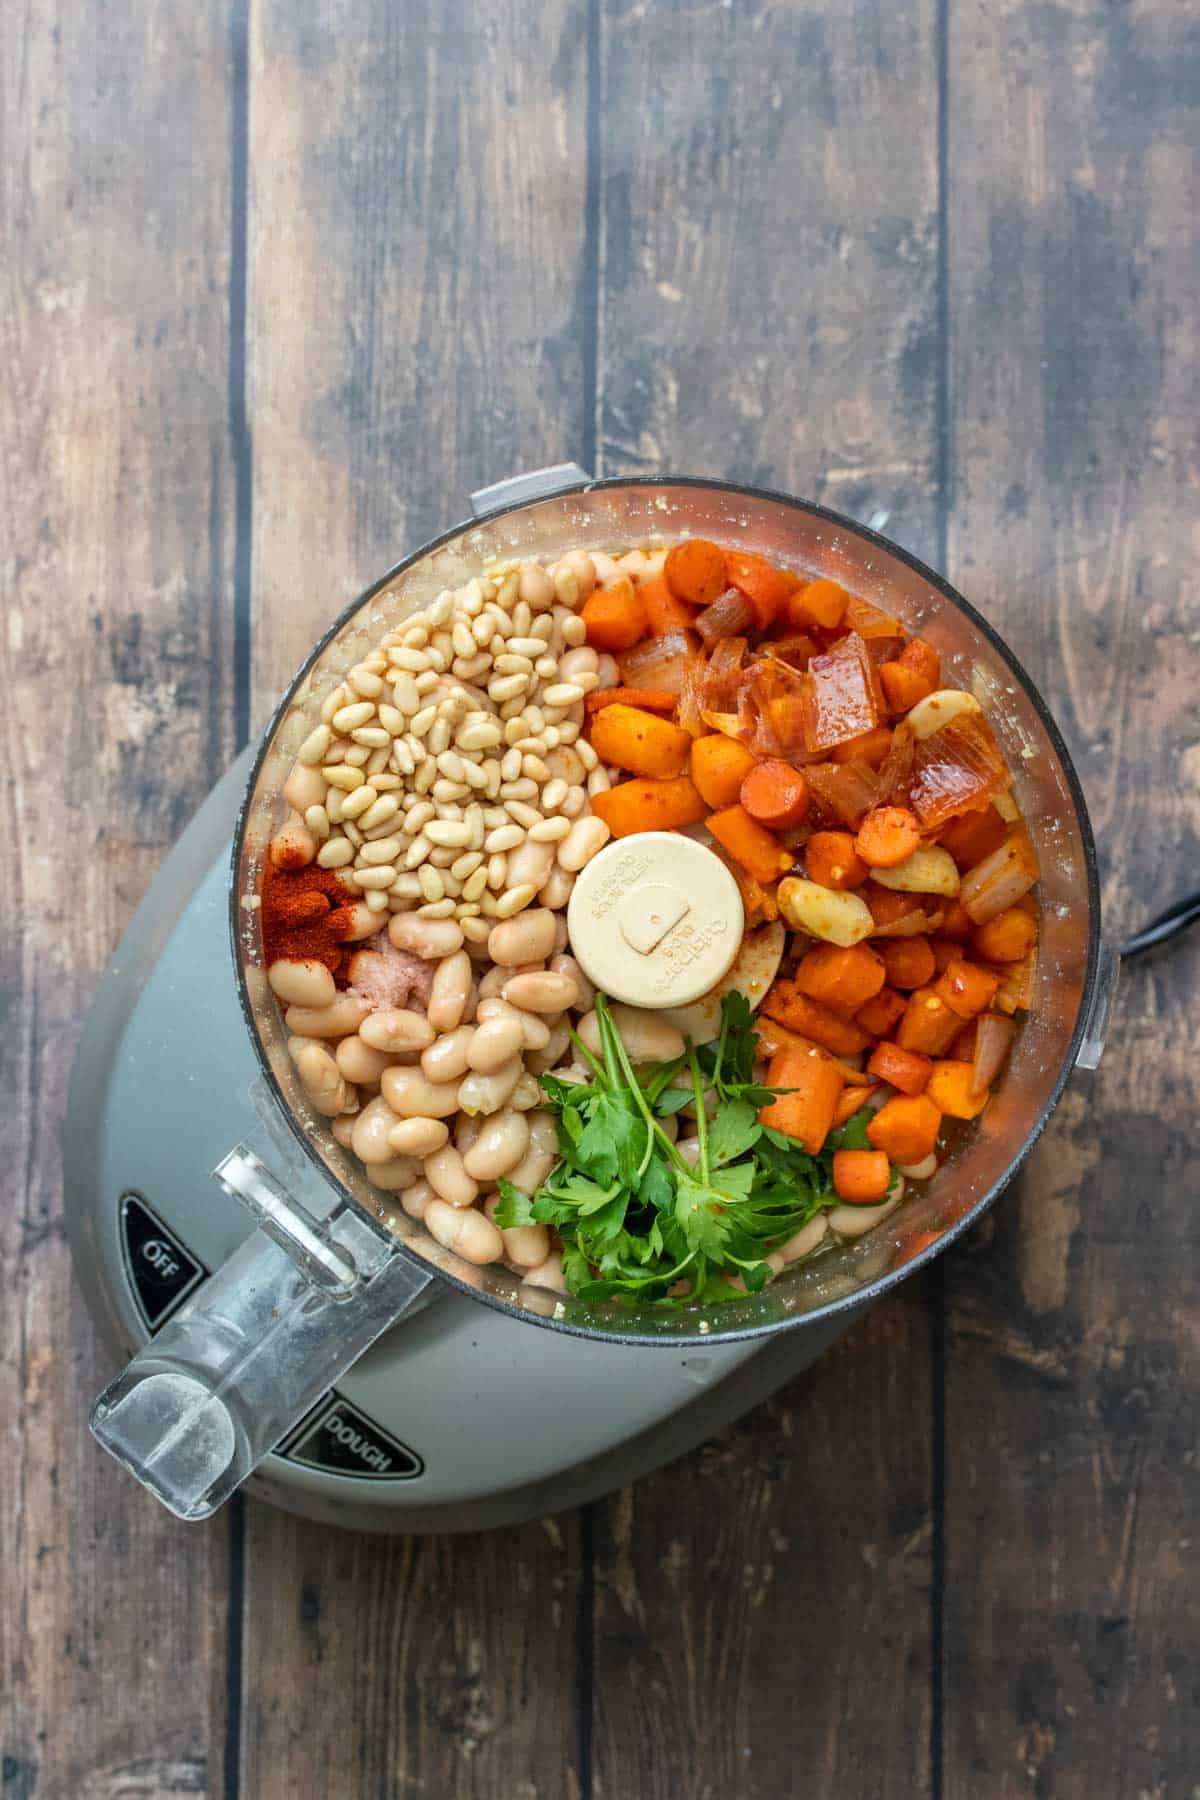 Top view of a food processor with pine nuts, beans, carrots and parsley inside